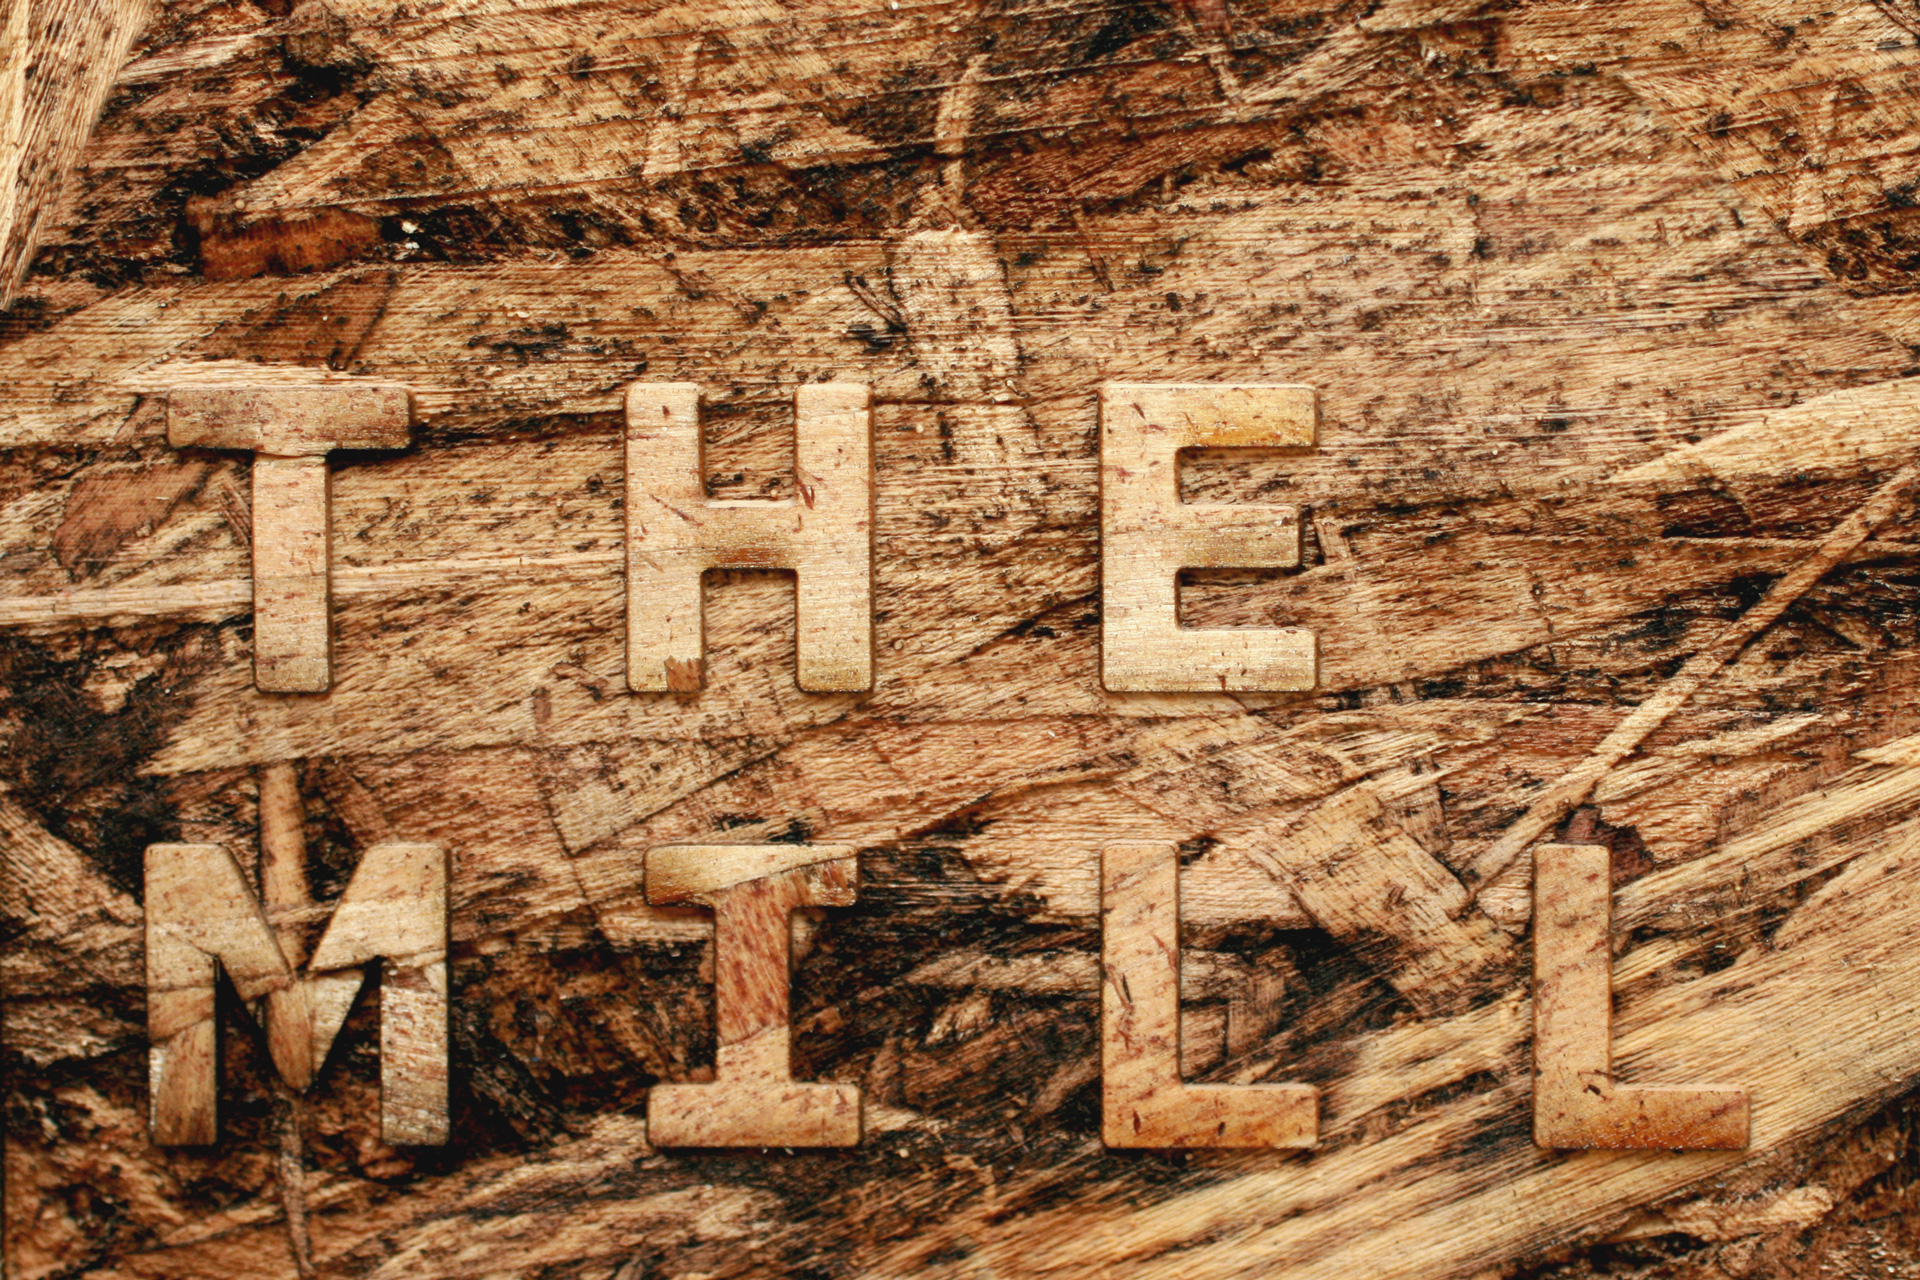 New Logo and Identity for The Mill by UnderConsideration